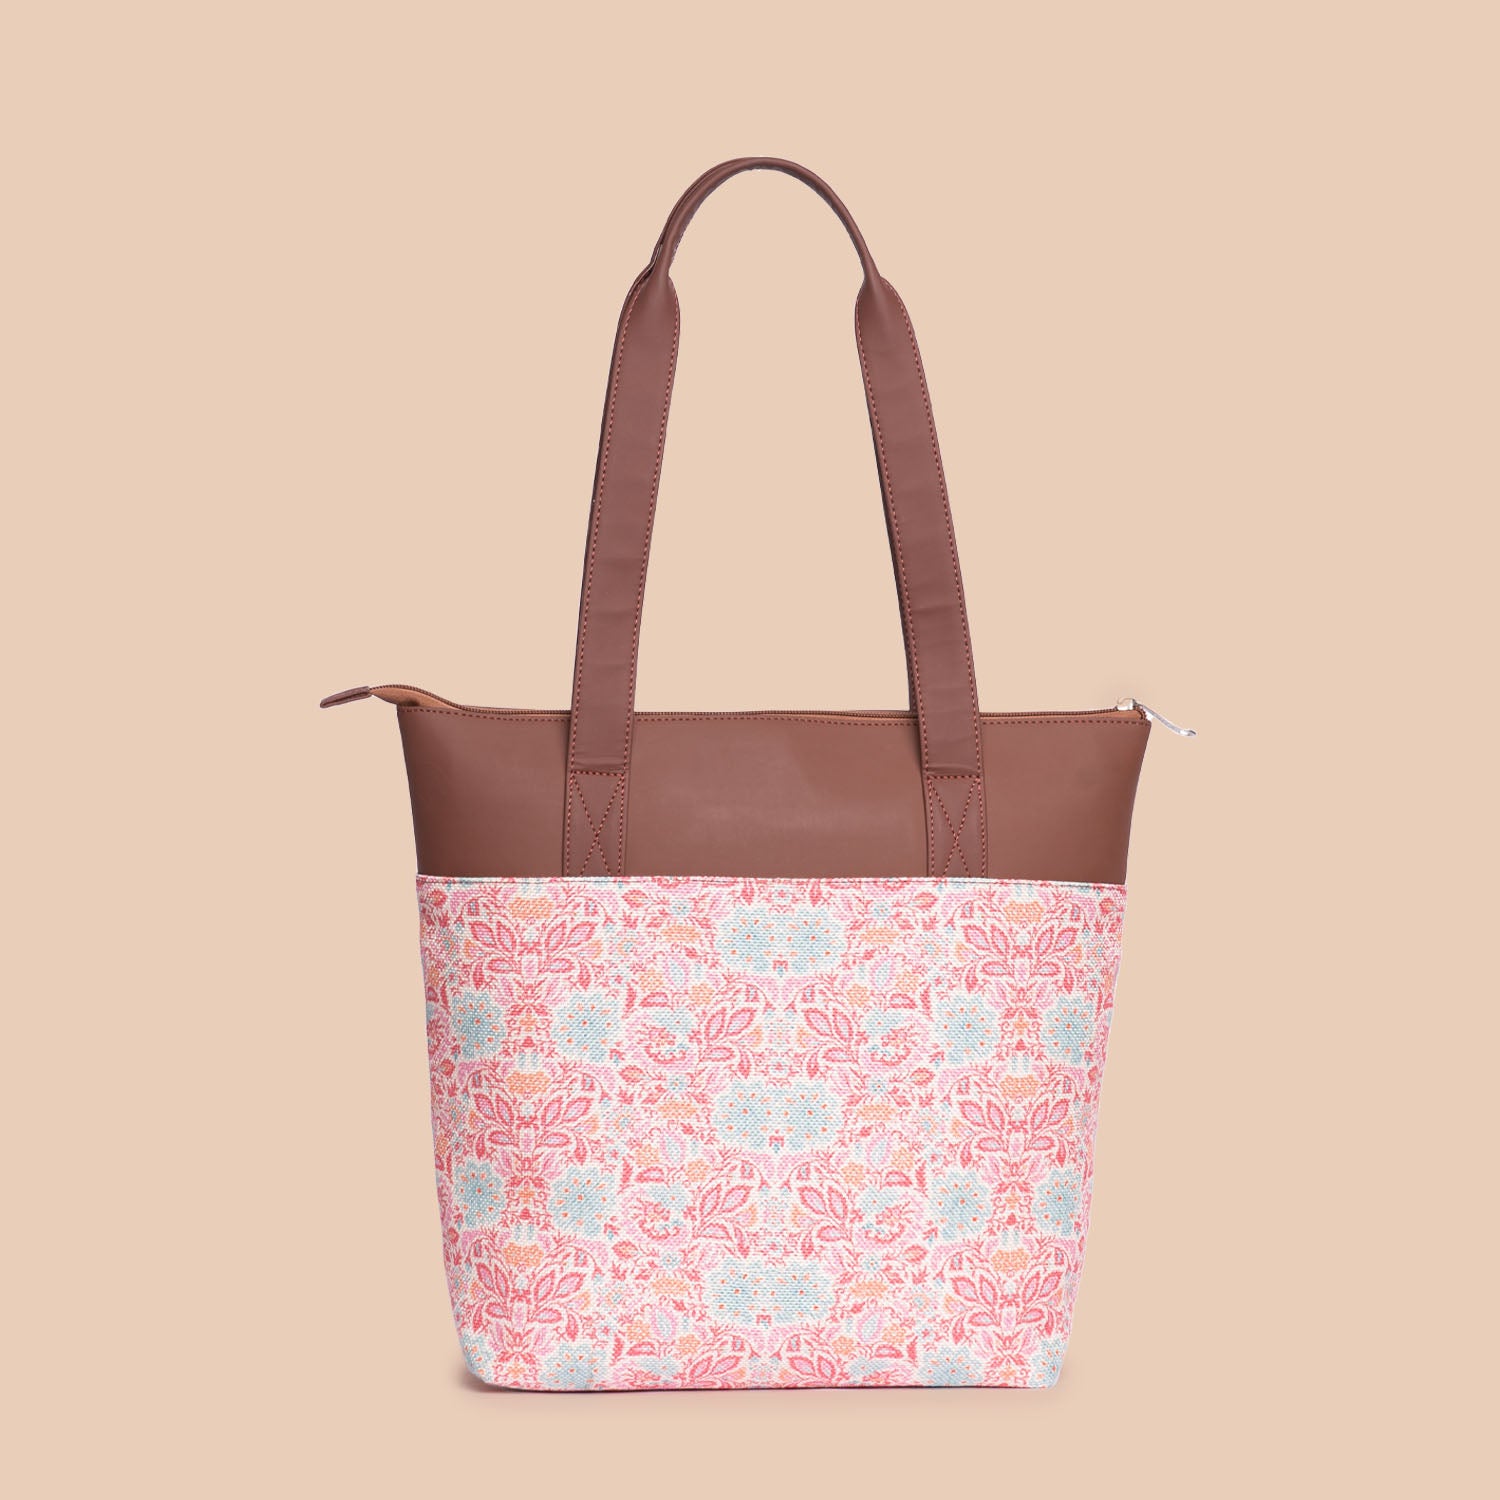 Mangalore Blossoms Everyday Tote bag